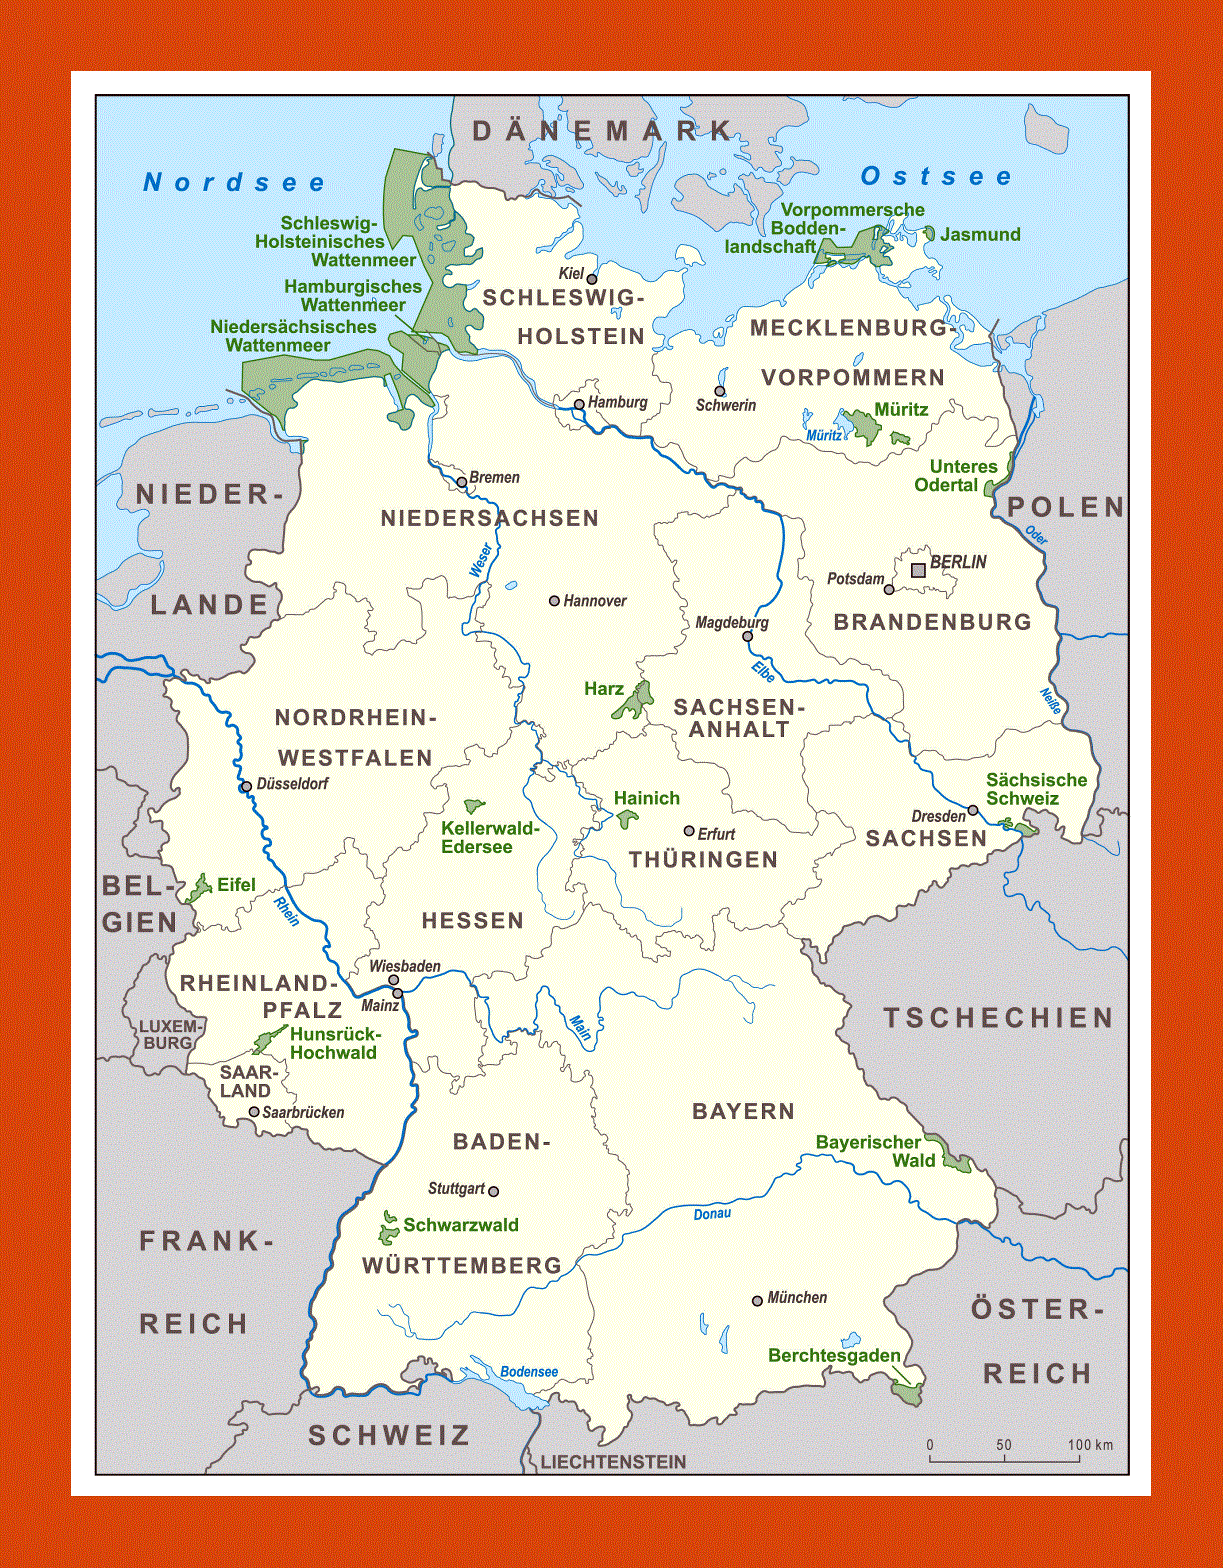 National parks map of Germany